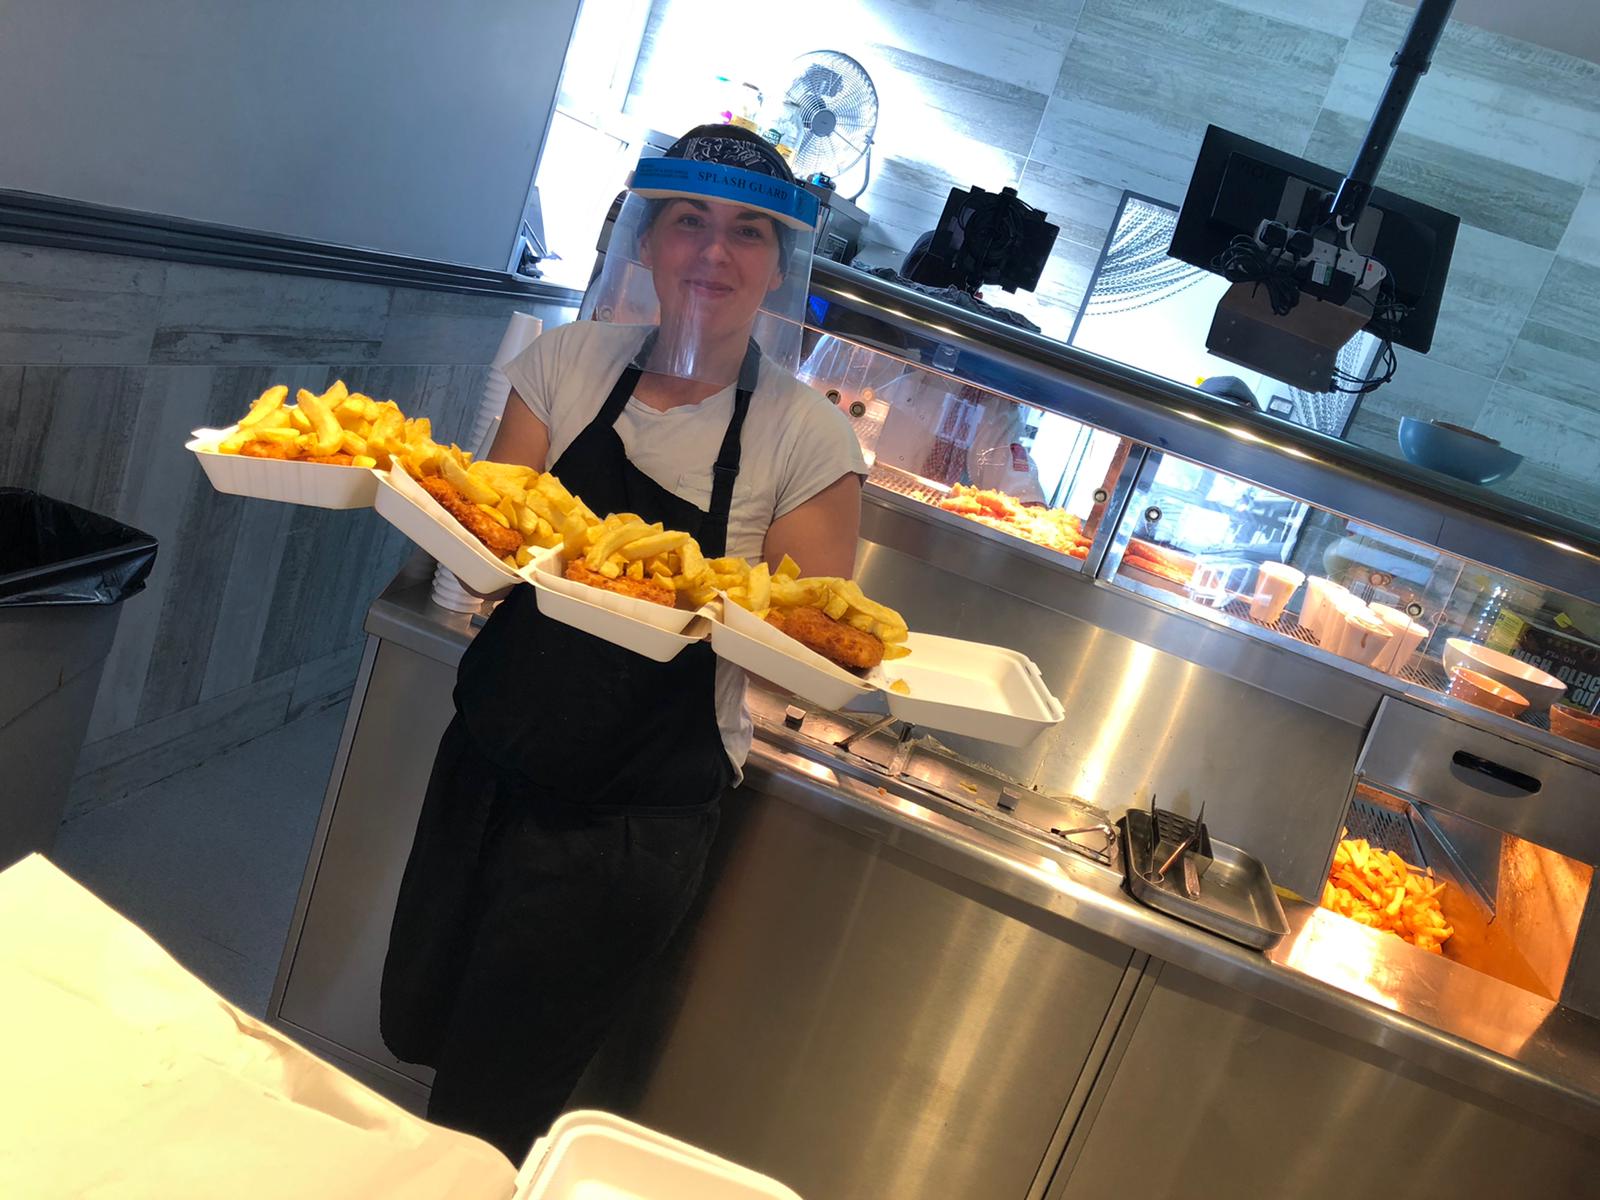 Changes have been made to the award winning Fylde Fish Bar fish and chip shops in Southport and Burscough to make them safer for diners